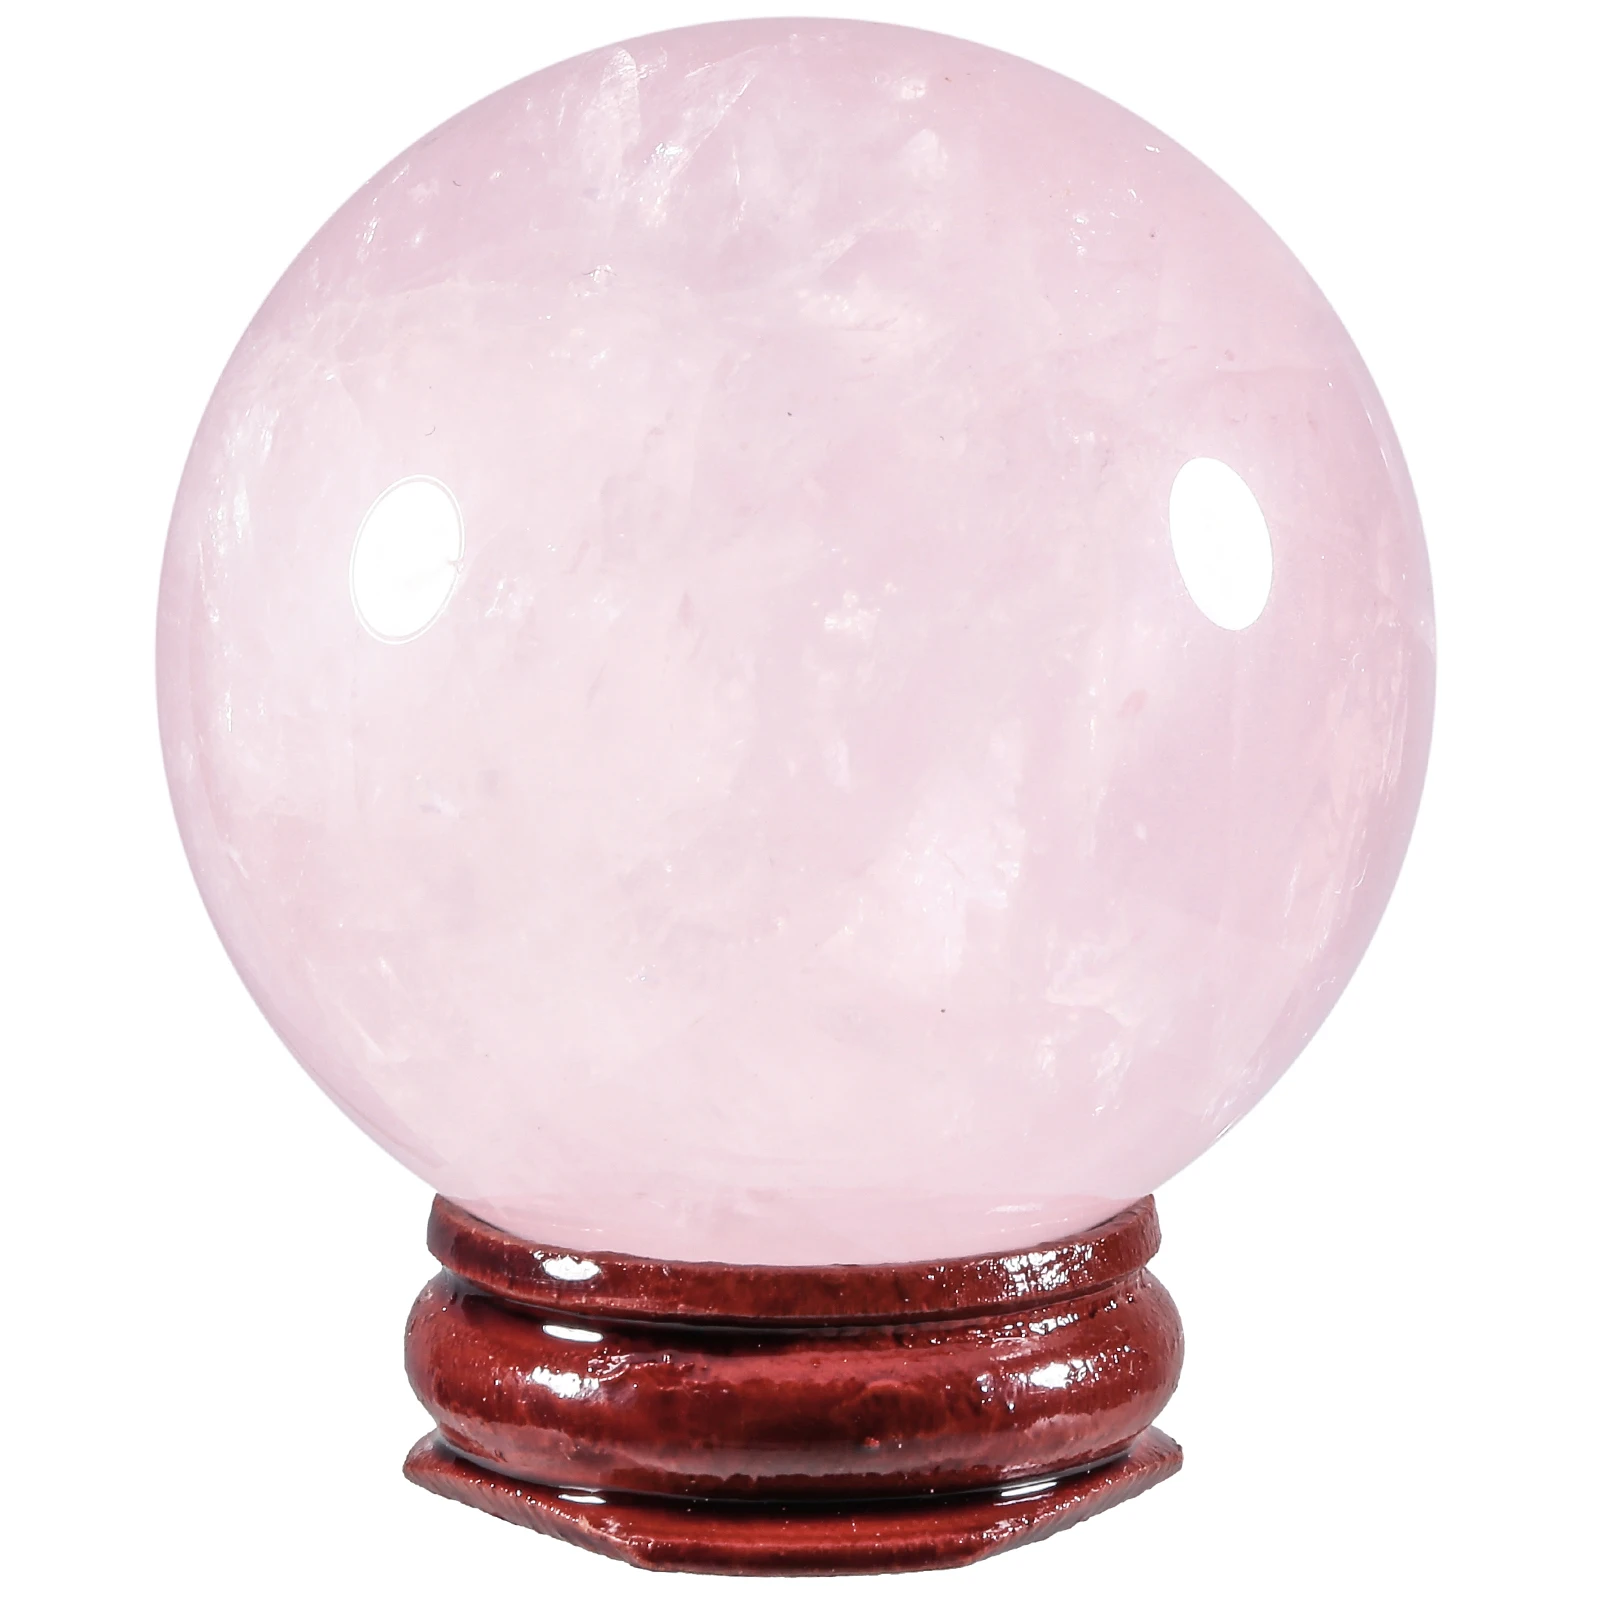 40-45mm/45-50mm Natural Crystal Ball With Wood Stand Healing Rose Quartz Rock Quart Sphere Sculpture Home Decoration